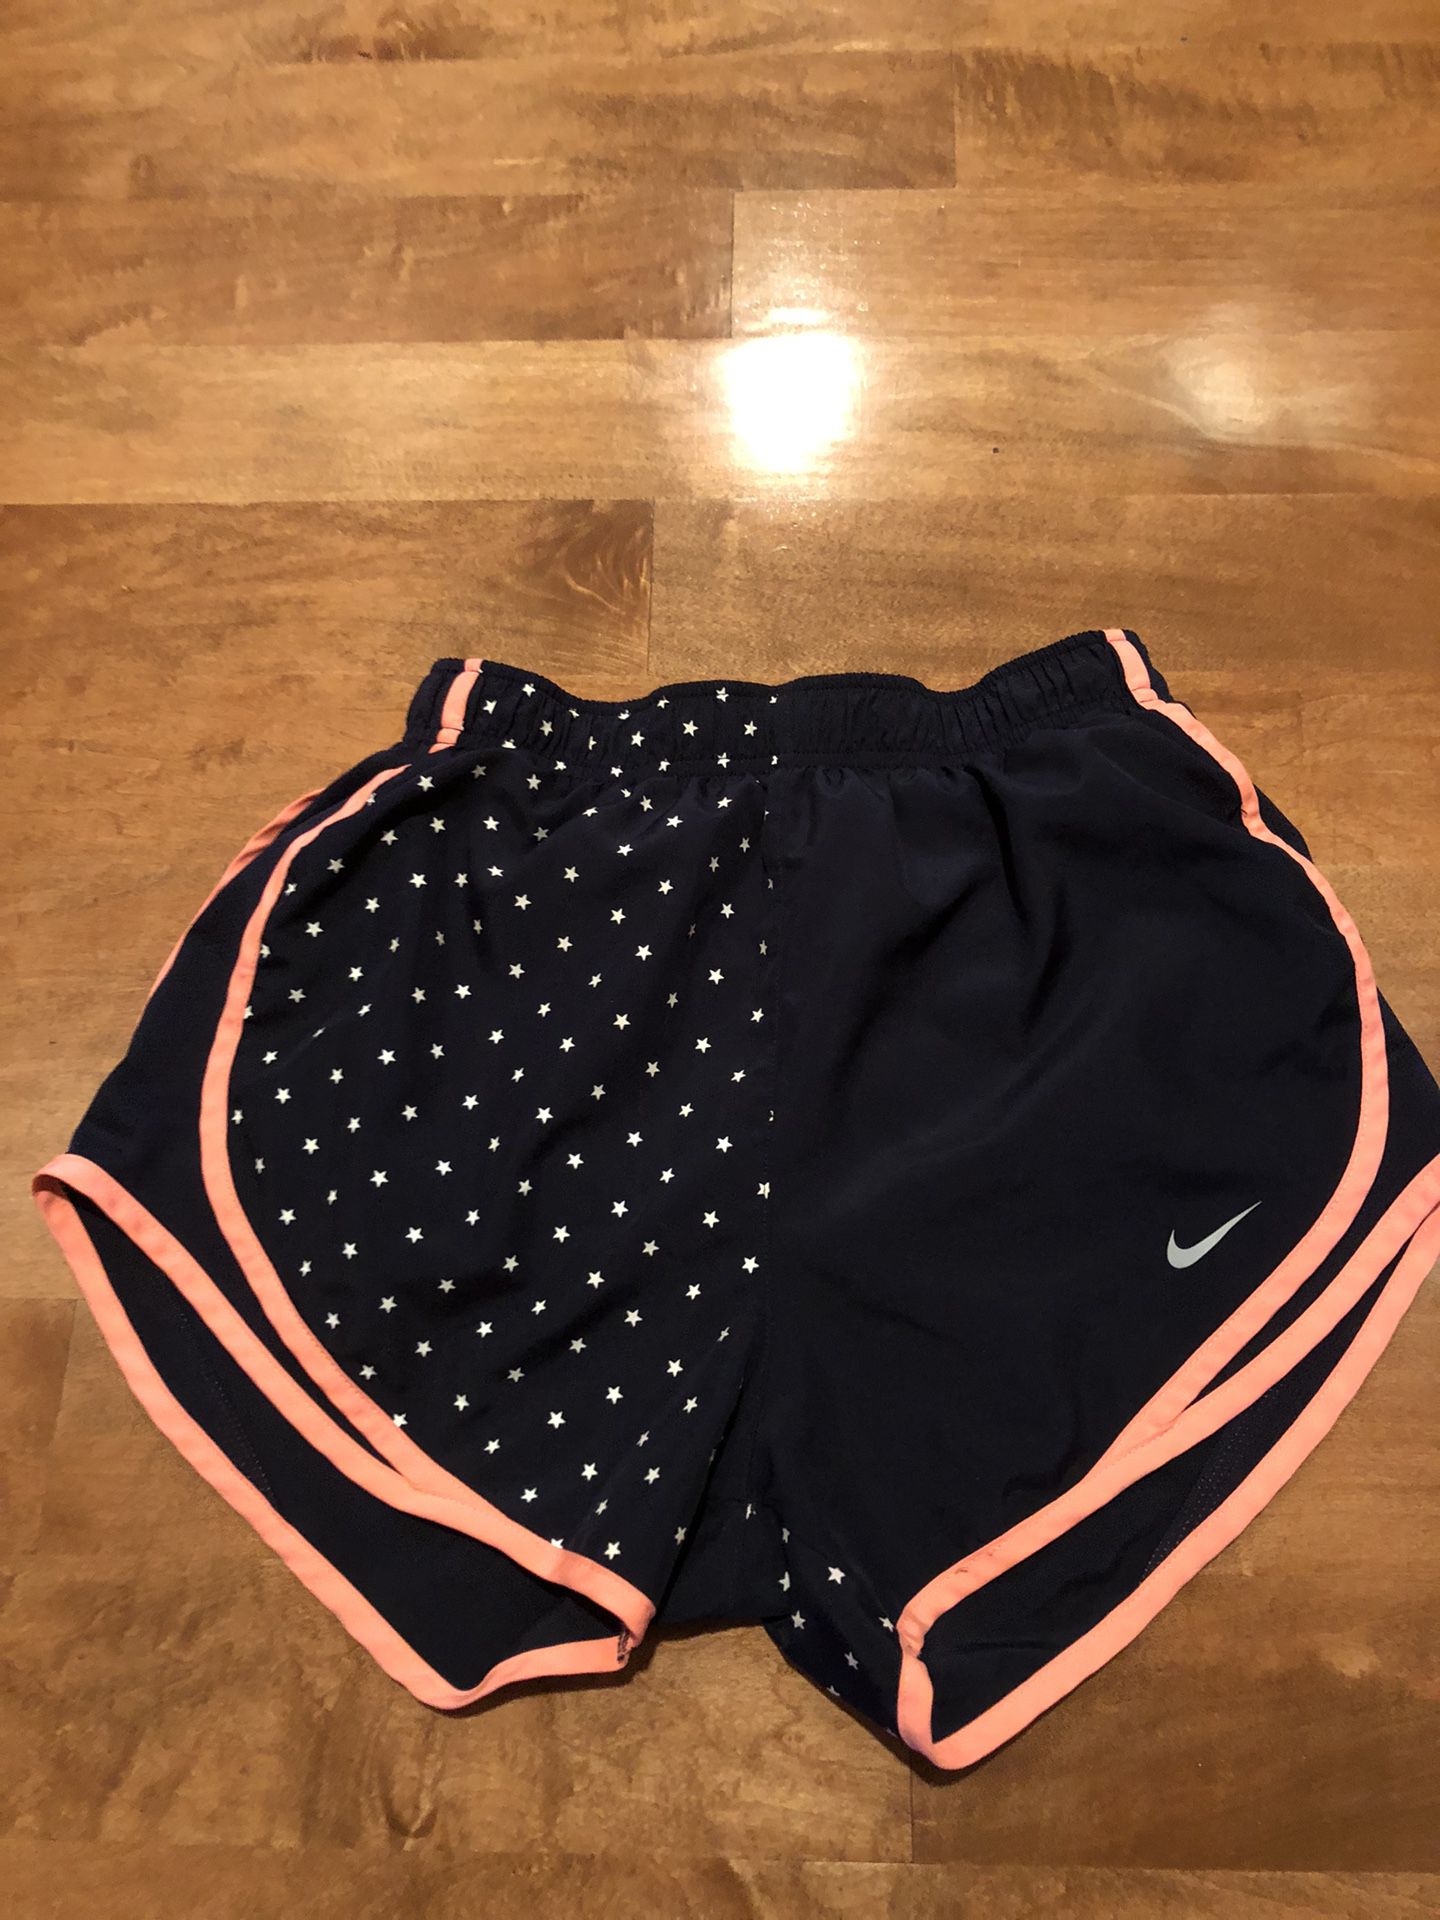 Nike Dri Fit Woman’s Shorts Shipping Available 